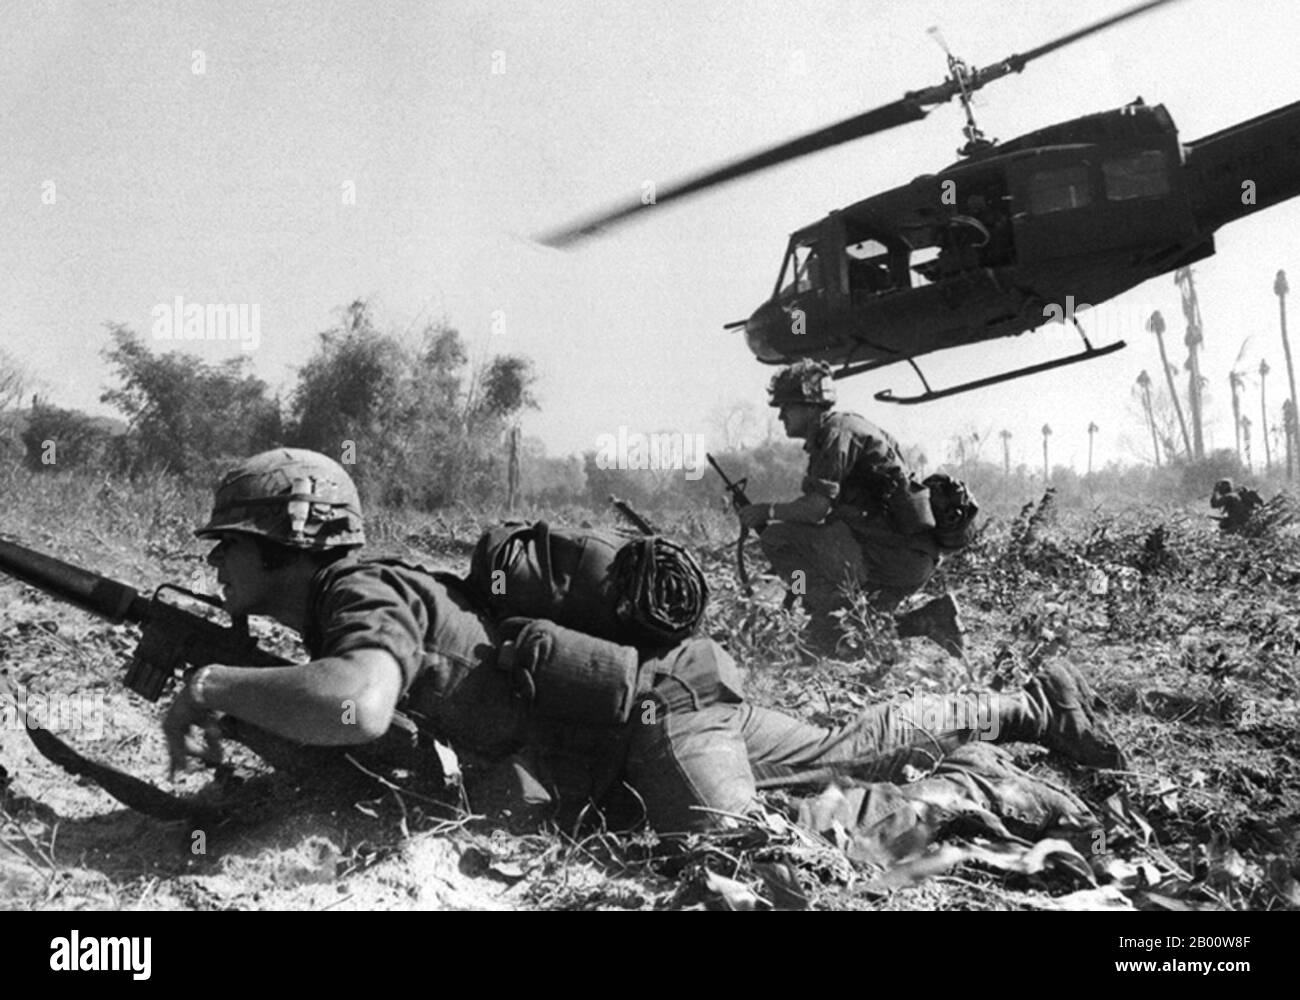 Vietnam: US forces supported by UH-1D Huey helicopter in action somewhere in South Vietnam, c. 1966.  The Second Indochina War, known in America as the Vietnam War, was a Cold War era military conflict that occurred in Vietnam, Laos, and Cambodia from 1 November 1955 to the fall of Saigon on 30 April 1975. This war followed the First Indochina War and was fought between North Vietnam, supported by its communist allies, and the government of South Vietnam, supported by the U.S. and other anti-communist nations. Stock Photo